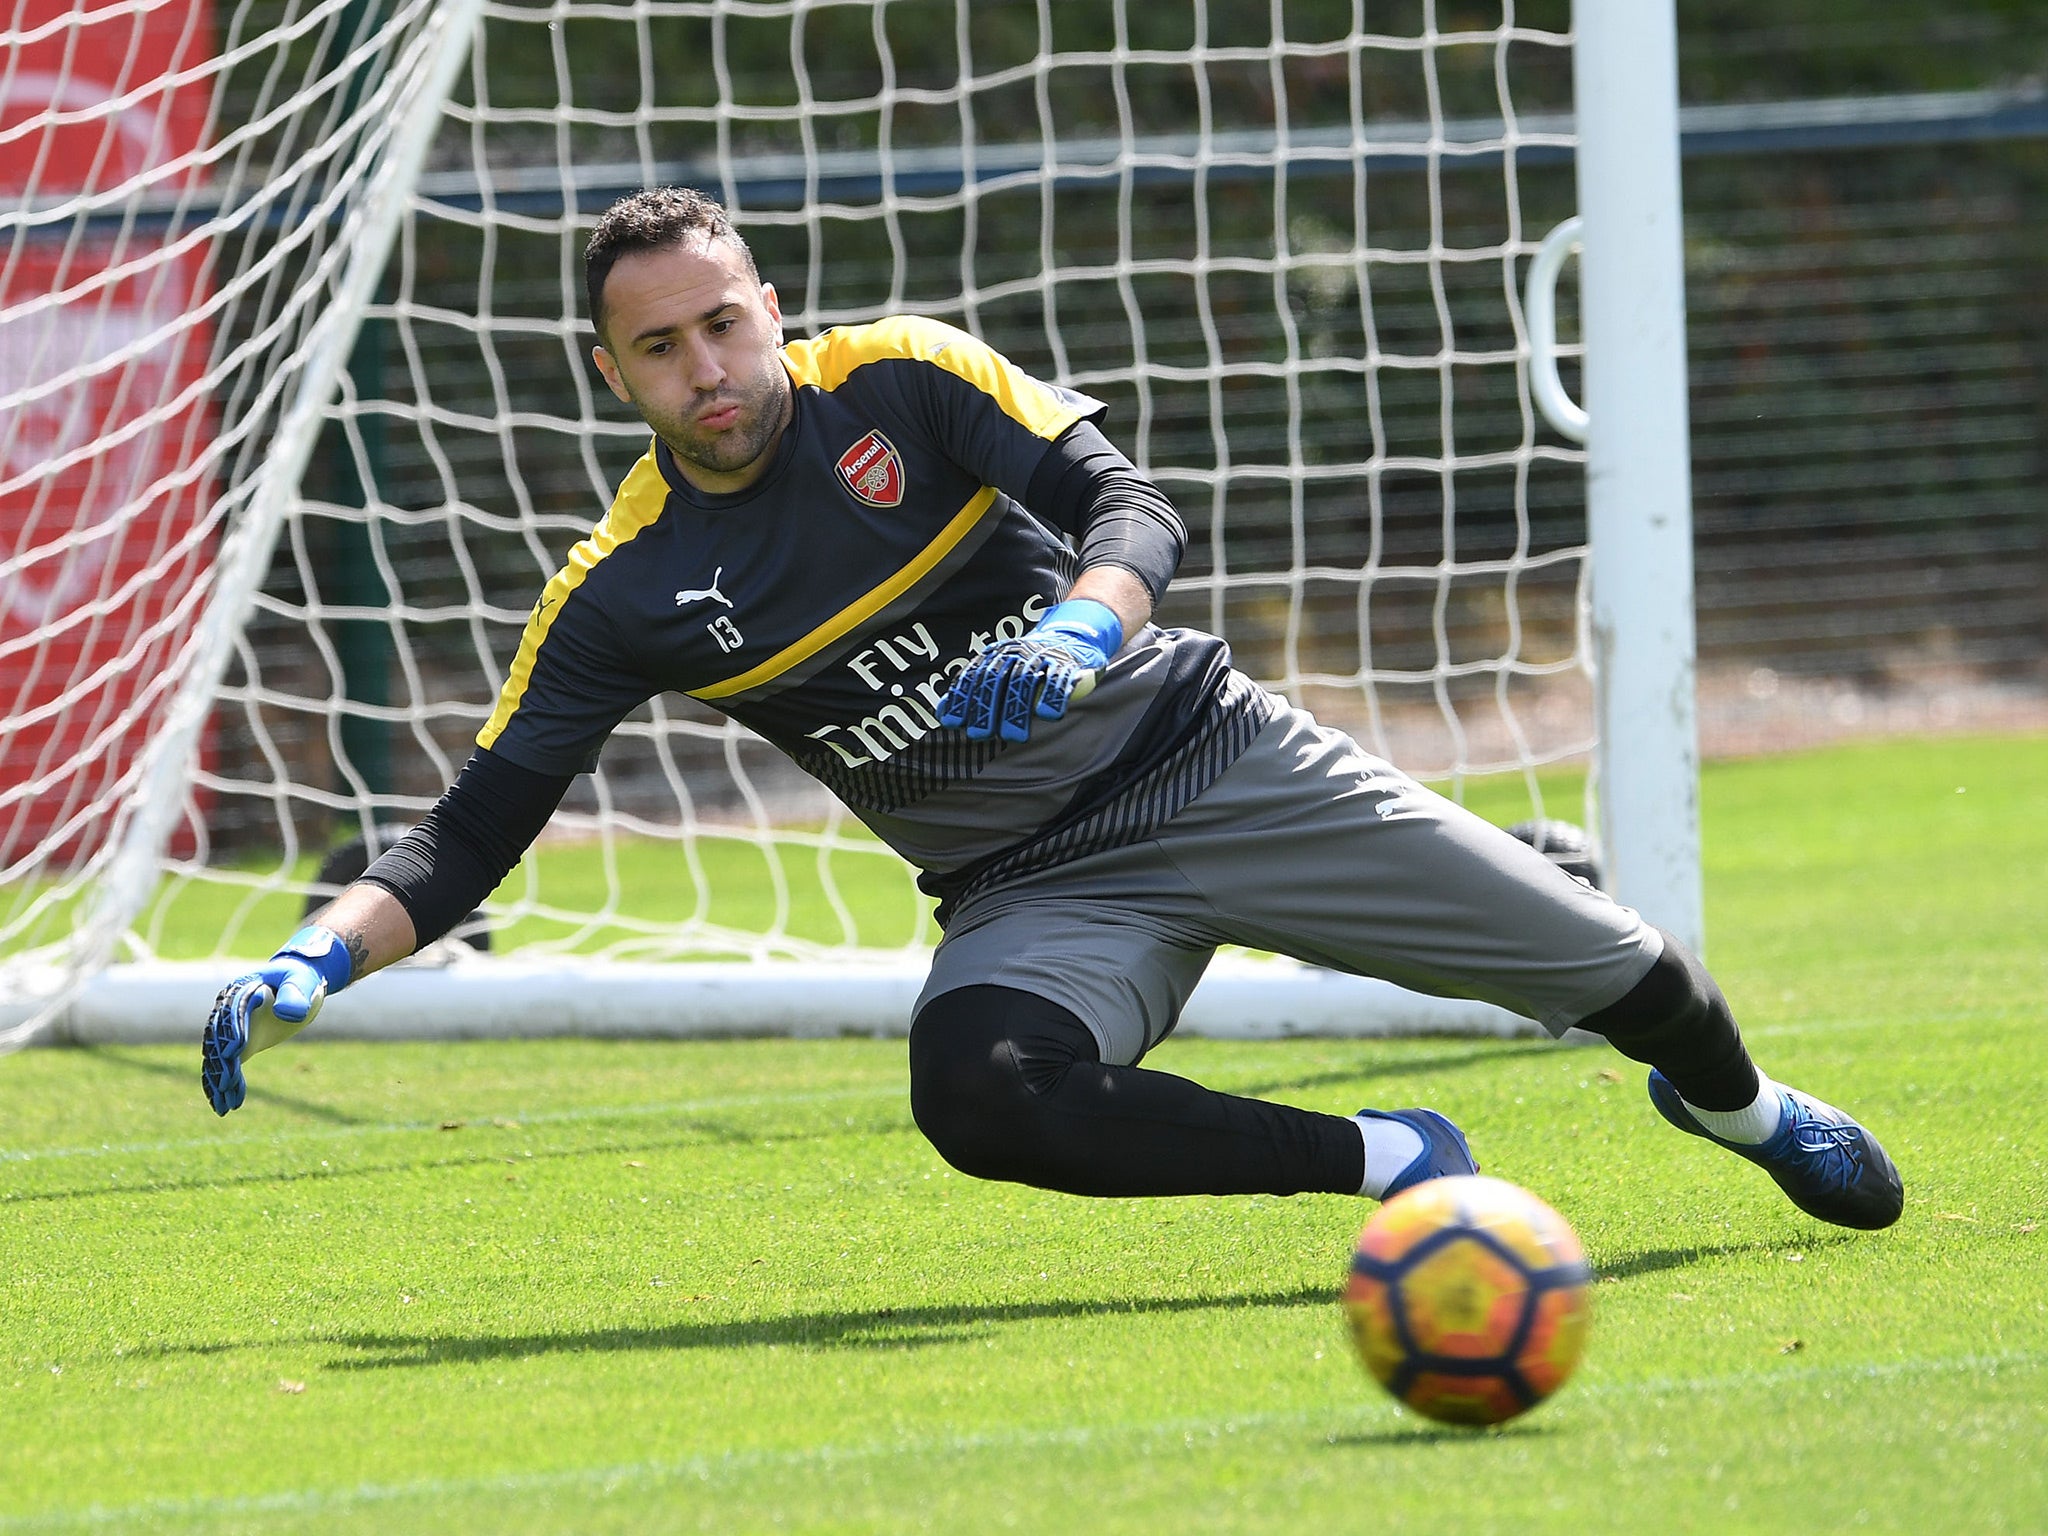 David Ospina will start in goal for Arsenal at Wembley